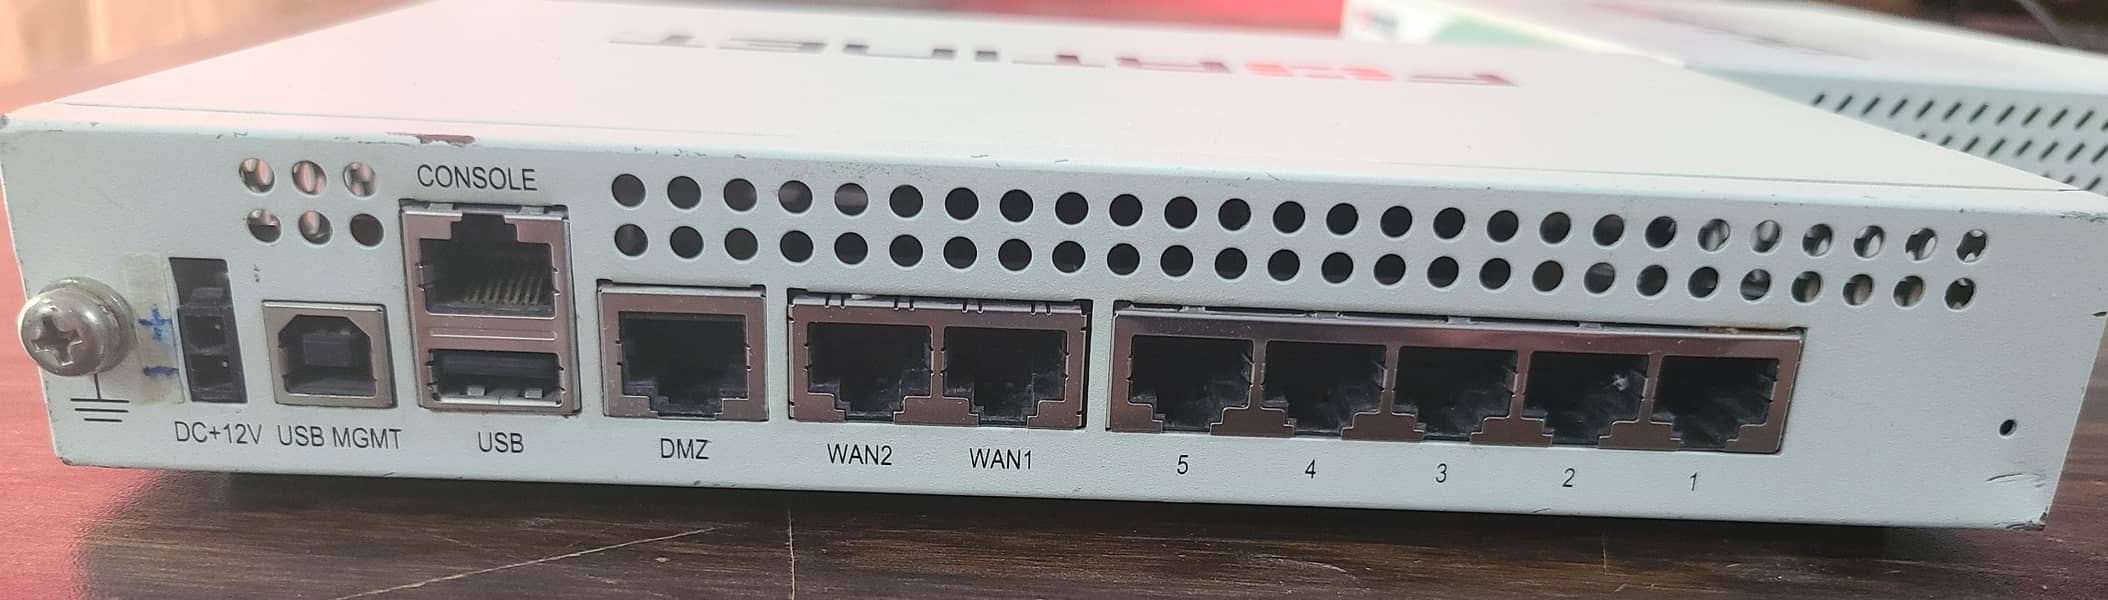 Fortinet/Fortigate/FG-60C/Firewall/Security/Appliances(Branded Used) 12